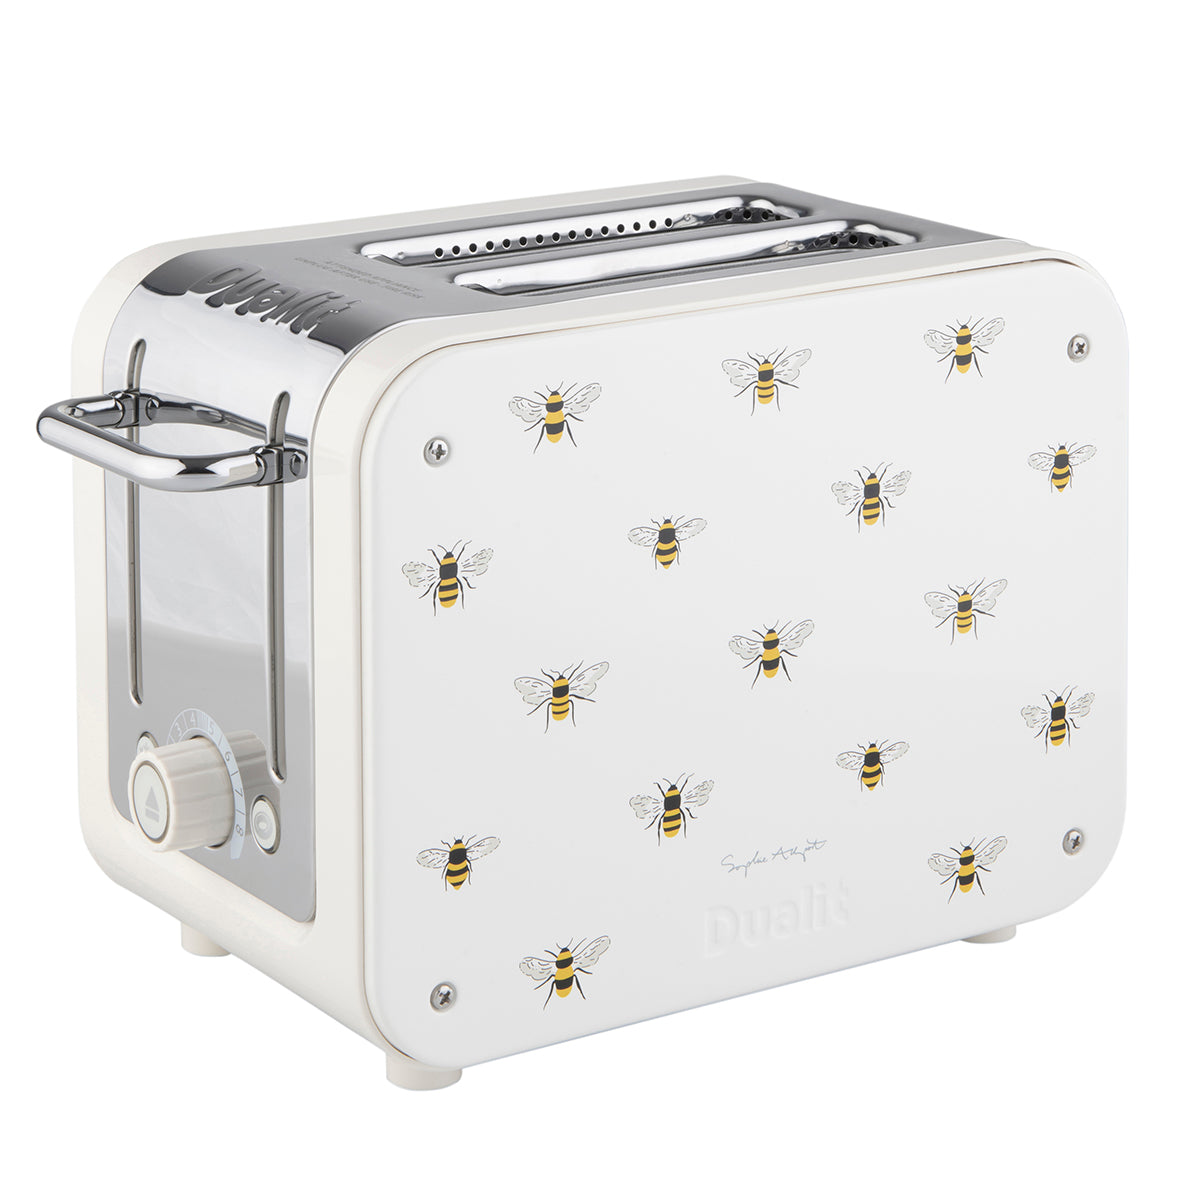 Dualit Toasters — Experience the Finest Toasting